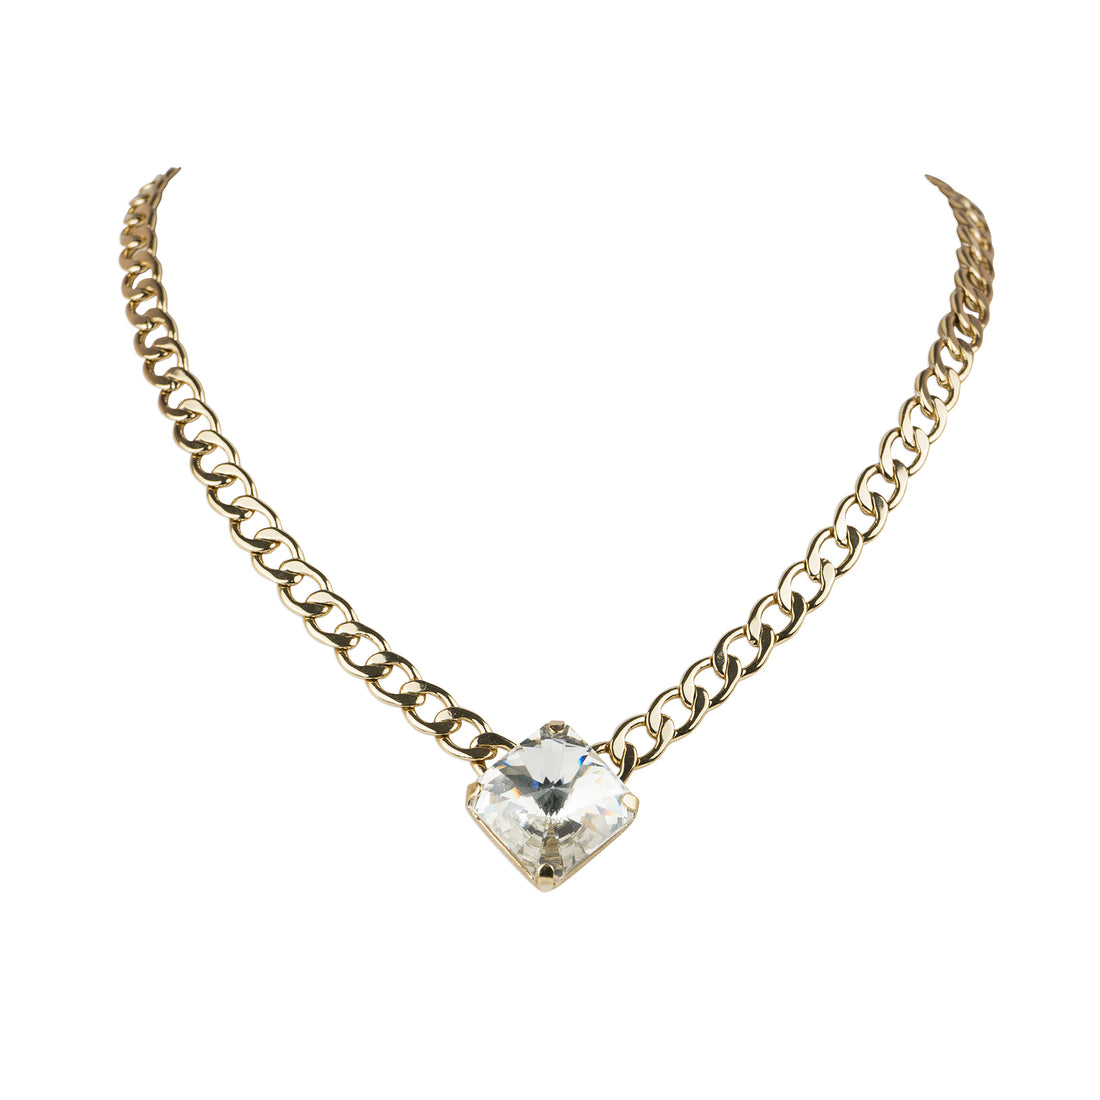 Chain choker necklace with Swarovski crystal square